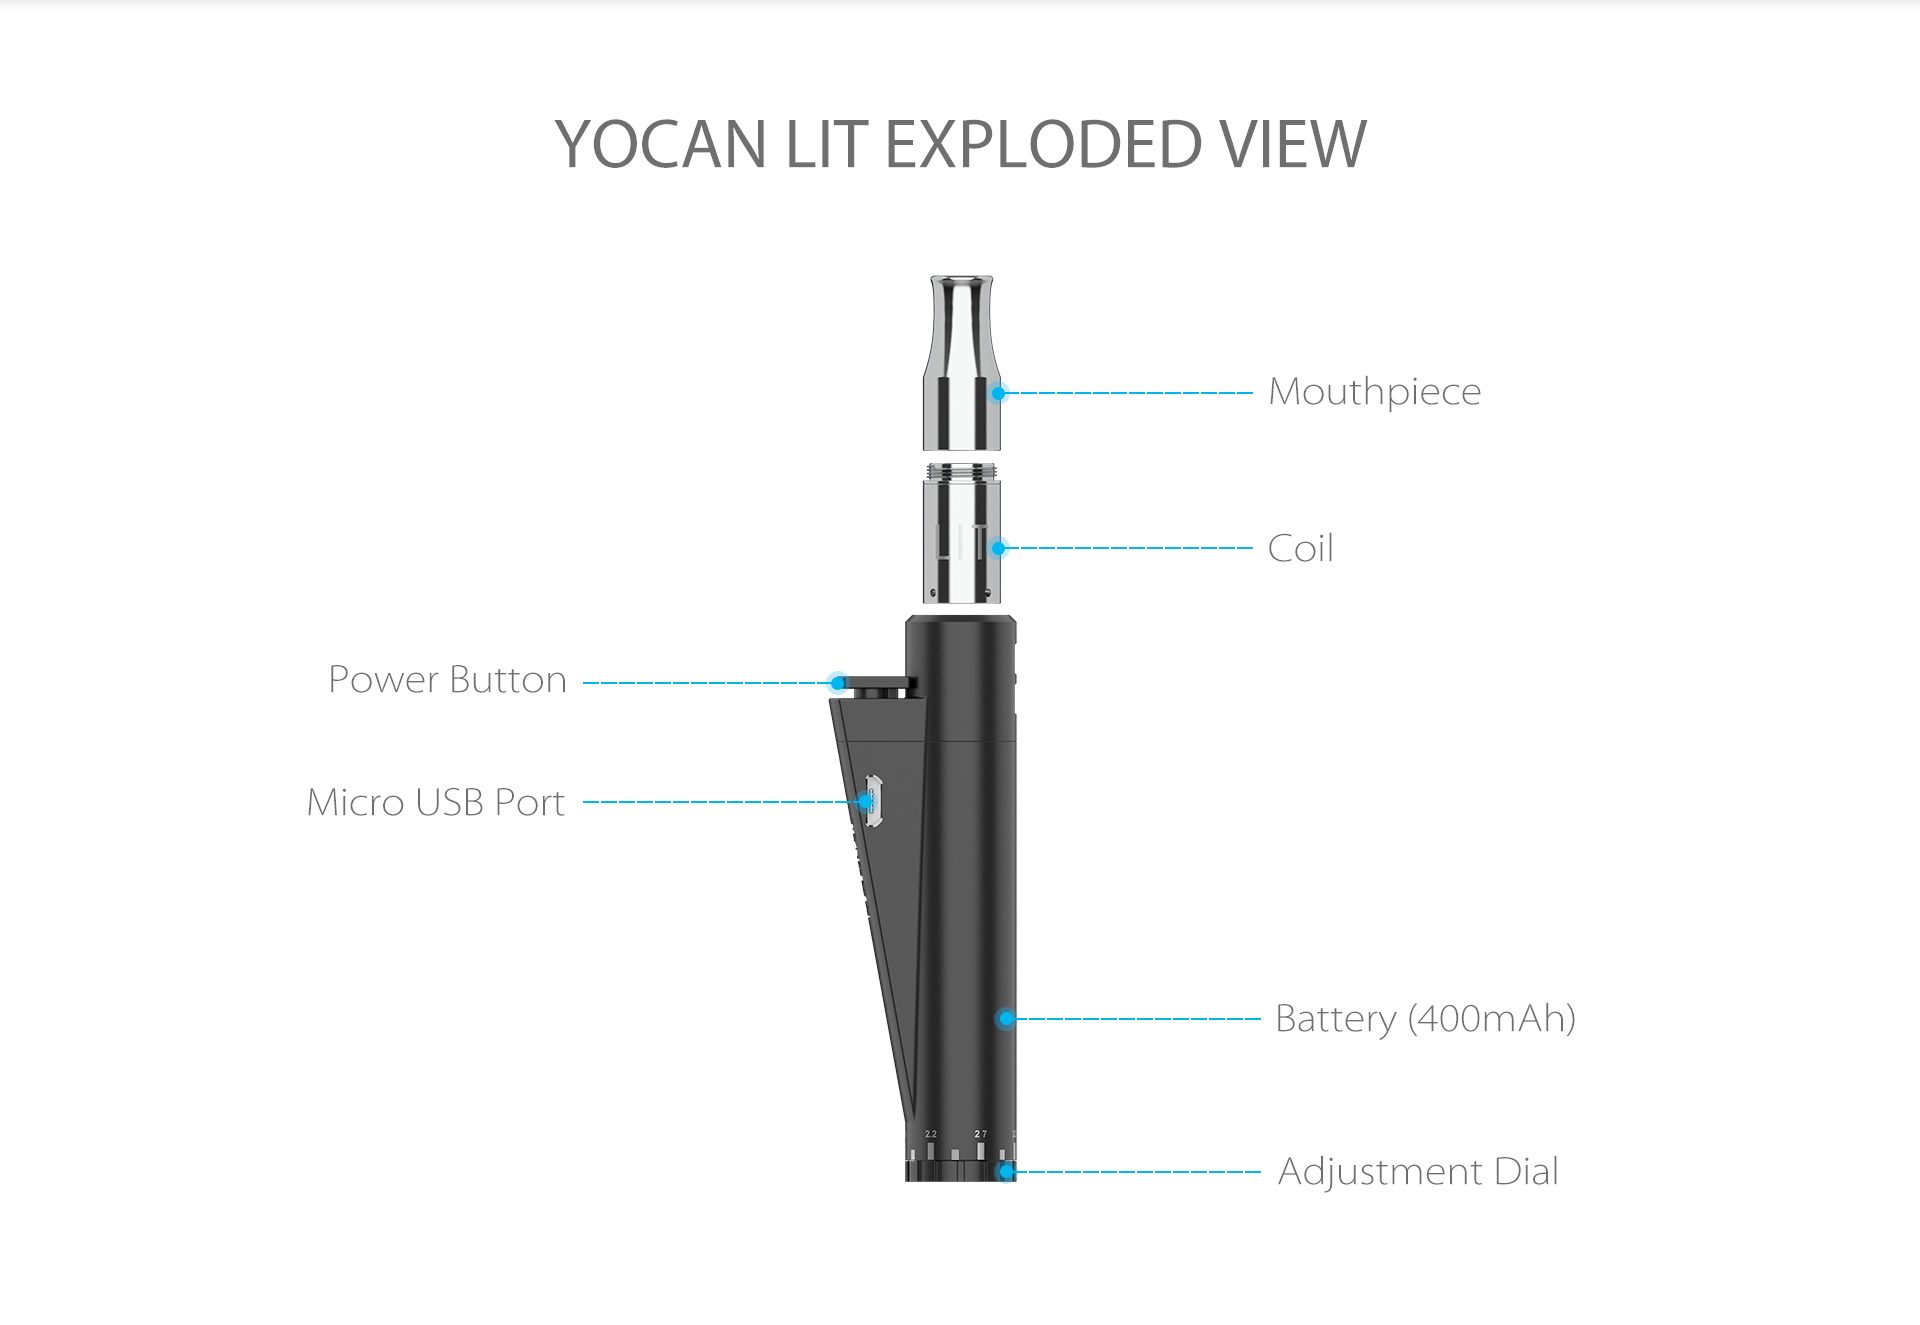 Yocan Lit Twist Concentrate Vaporizer exploded view.